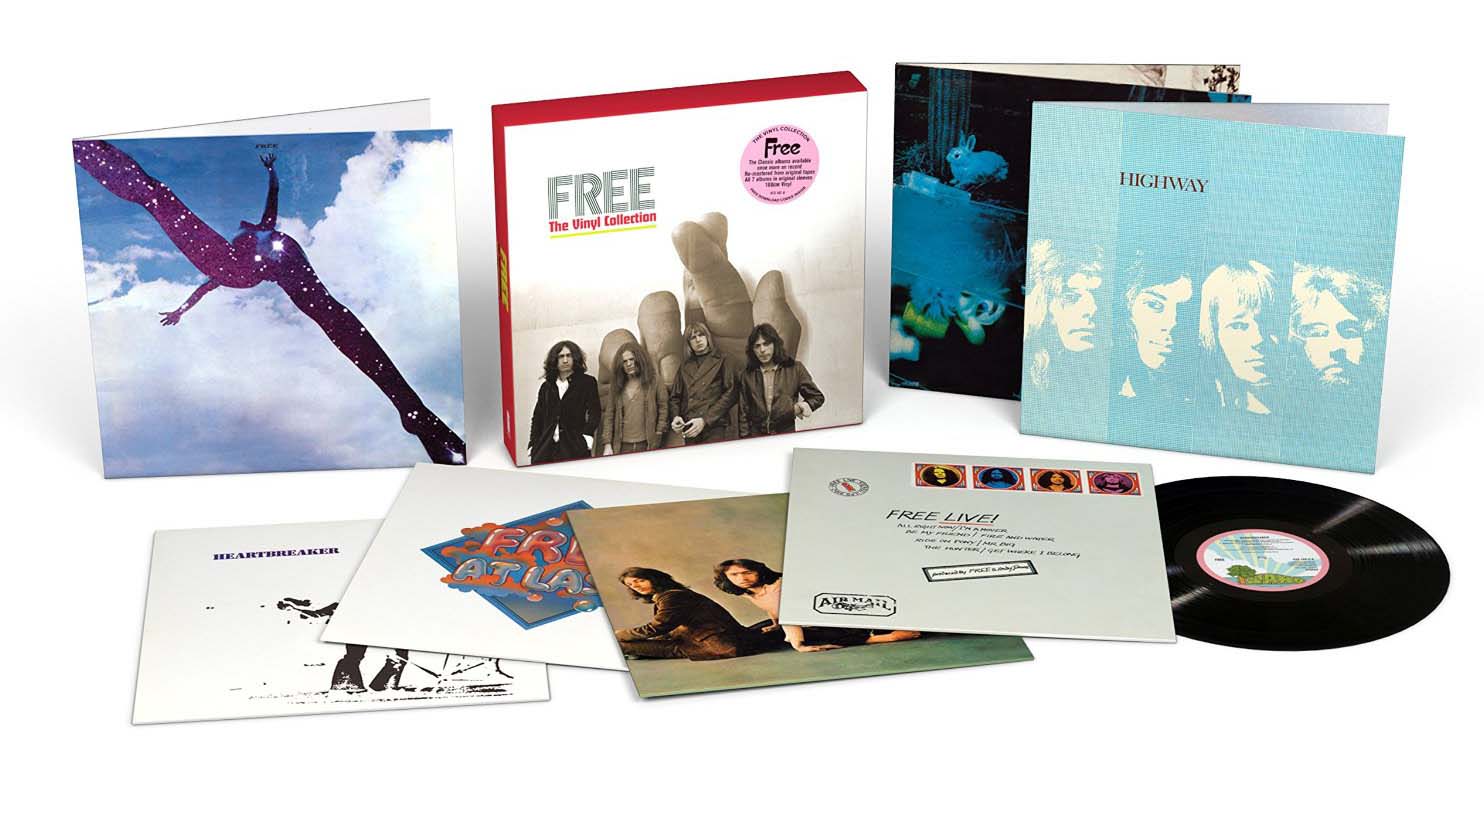 Free Appreciation Society: FREE - The Vinyl Collection